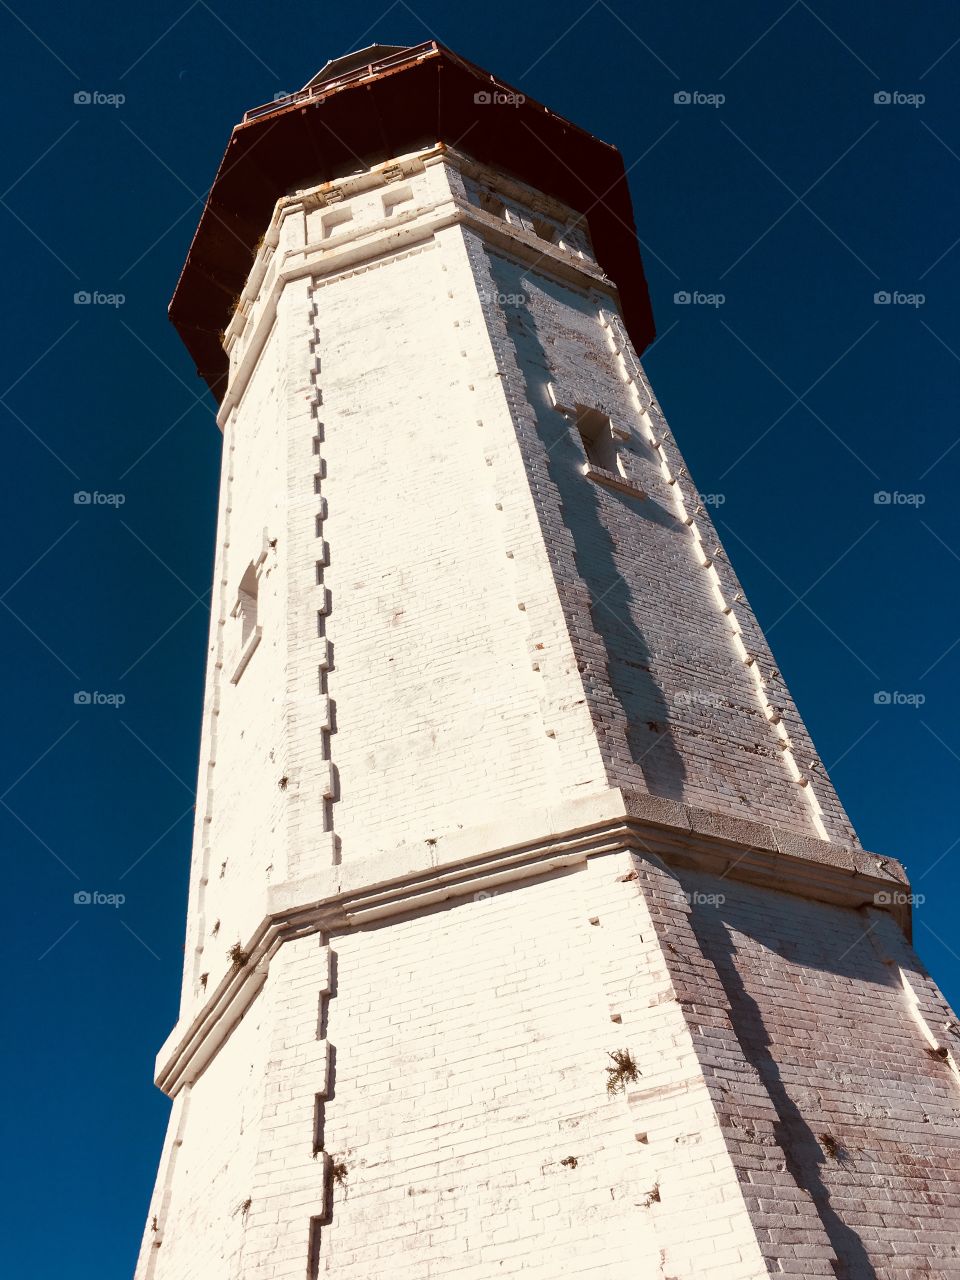 One of the oldest light house in the north. Found at Burgos Ilocos Norte. Lighthouse offers the majestic view of the shores and Mountain range of Ilocos. 

